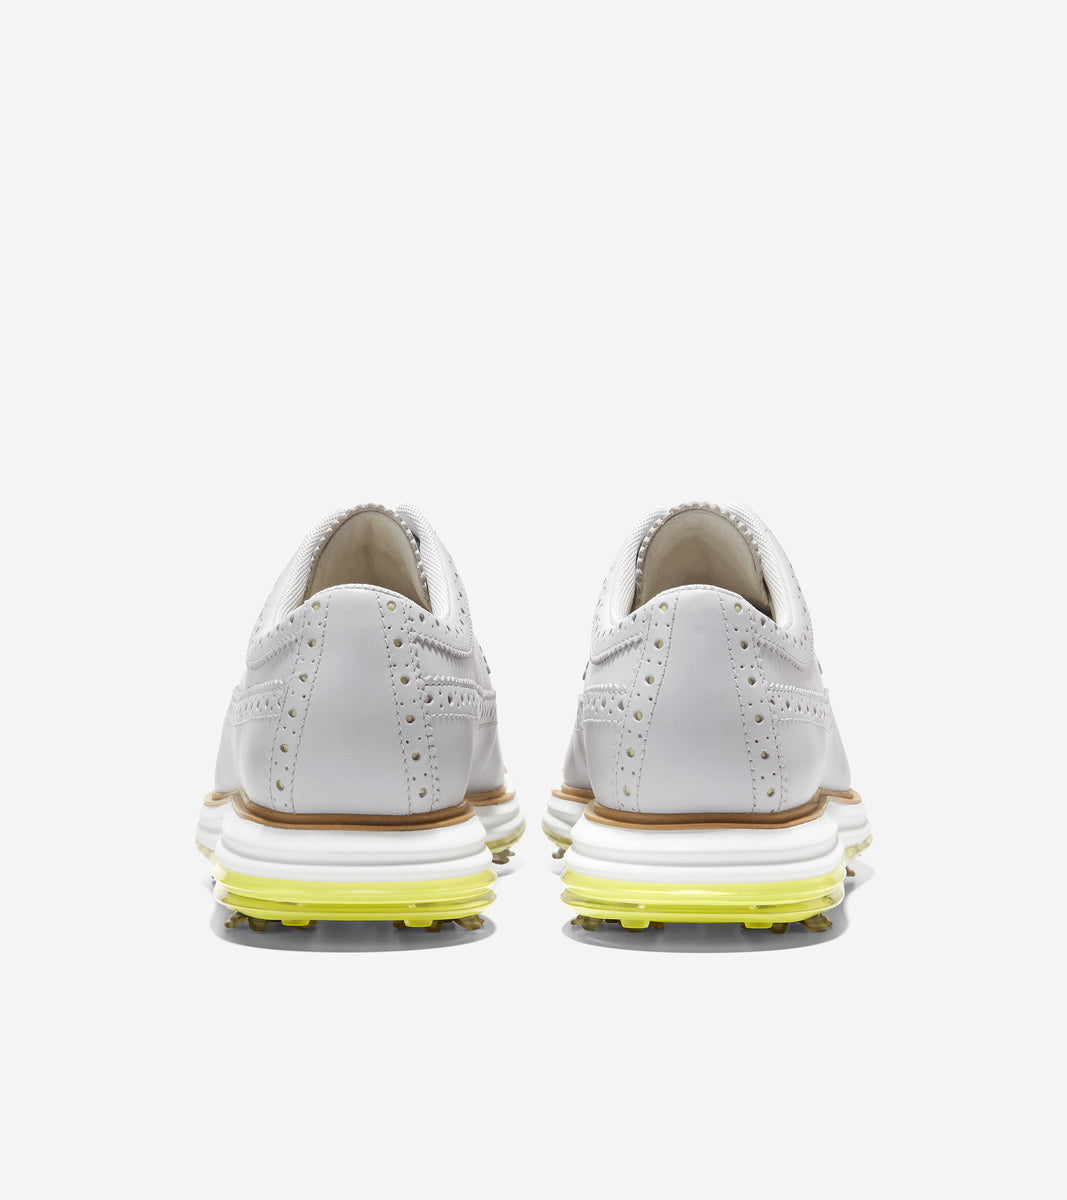 Comfort Bliss LL No Wire 1119246:Pantone Tap Shoe:44H